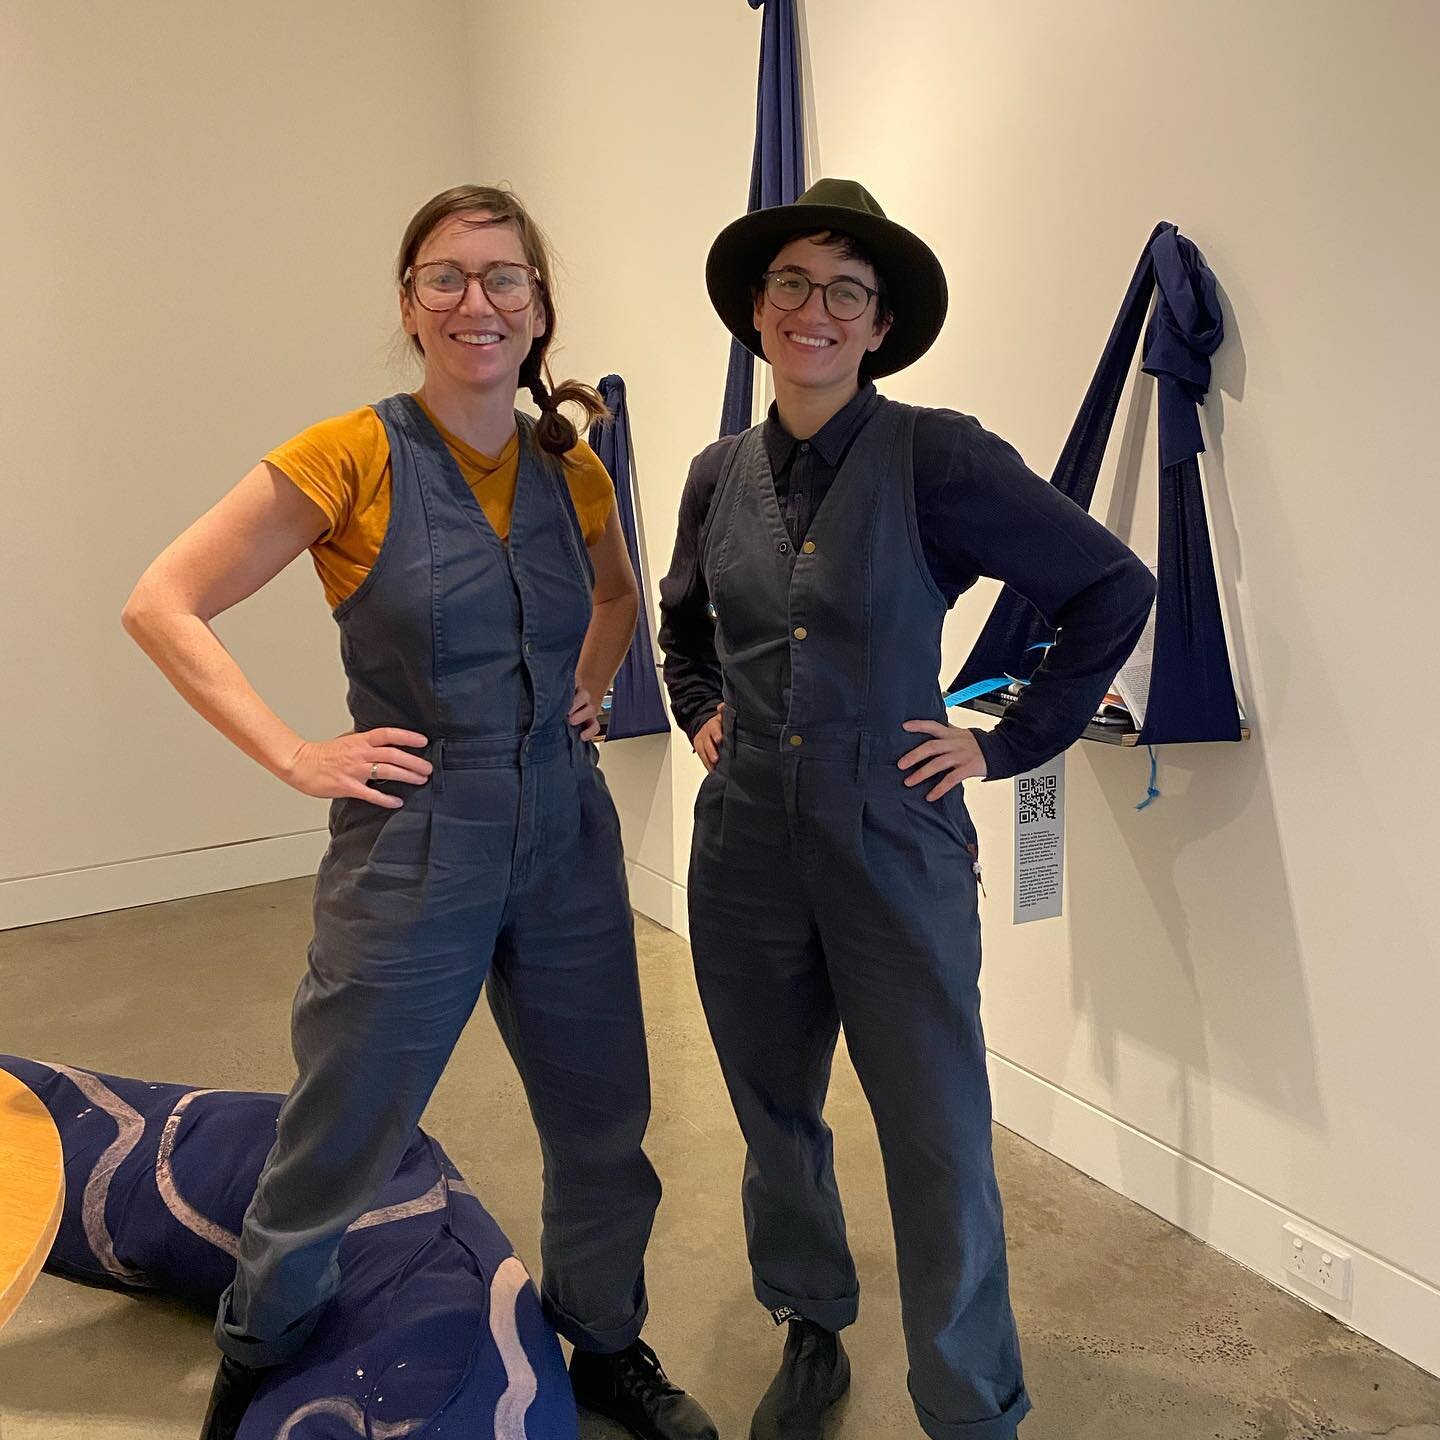 Artists Connie Anthes and Rebecca Gallo from Sydney collaboration @make.or.break are running their current project &mdash; The Department of Non-Human Resources &mdash;@lismoreregionalgallery 
Check the gallery website or their Insta posts for more i